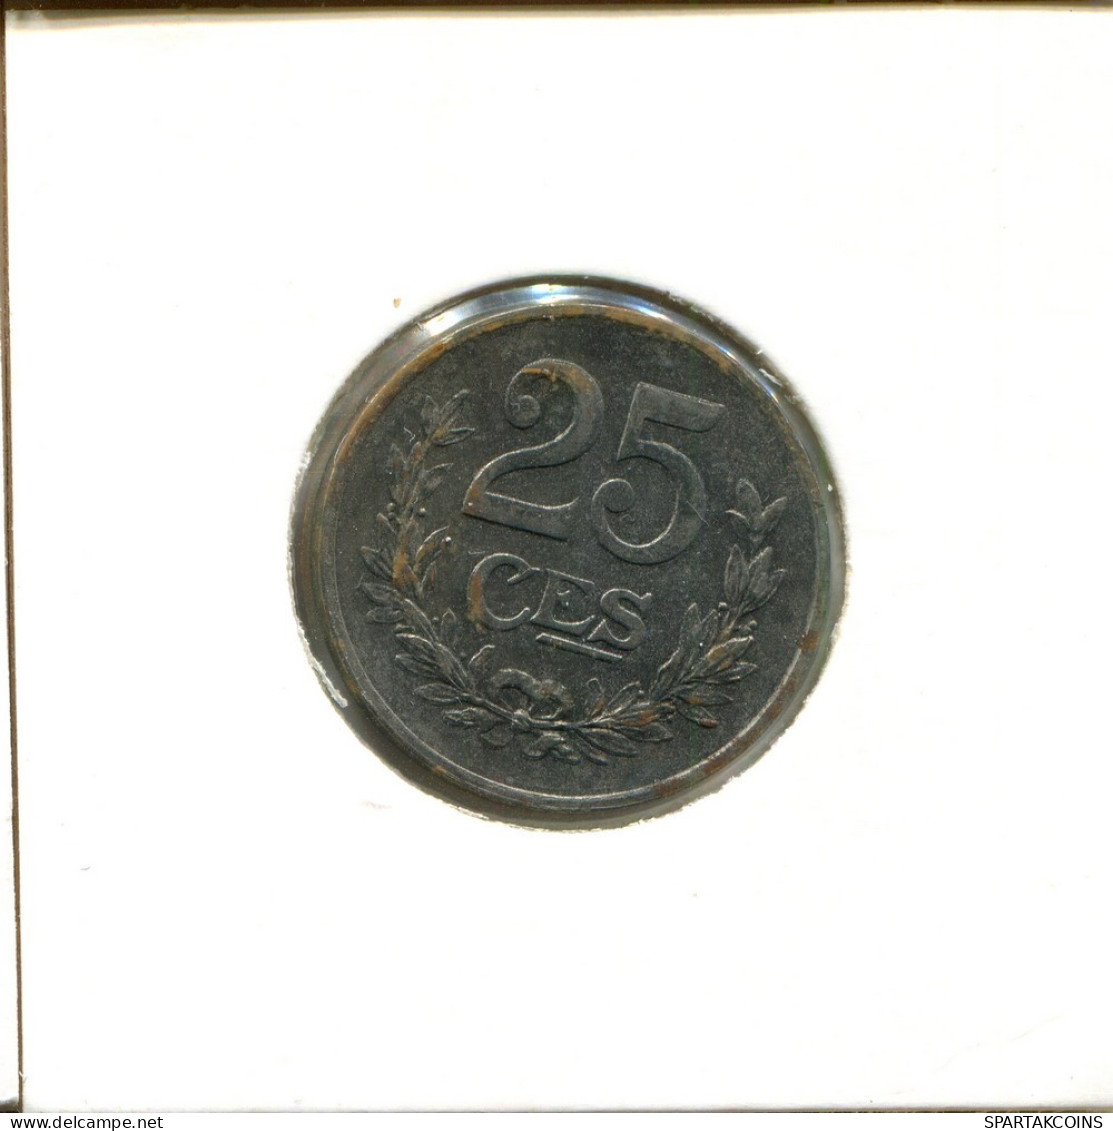 25 CENTIMES 1920 LUXEMBOURG Coin #AT186.U.A - Luxemburg